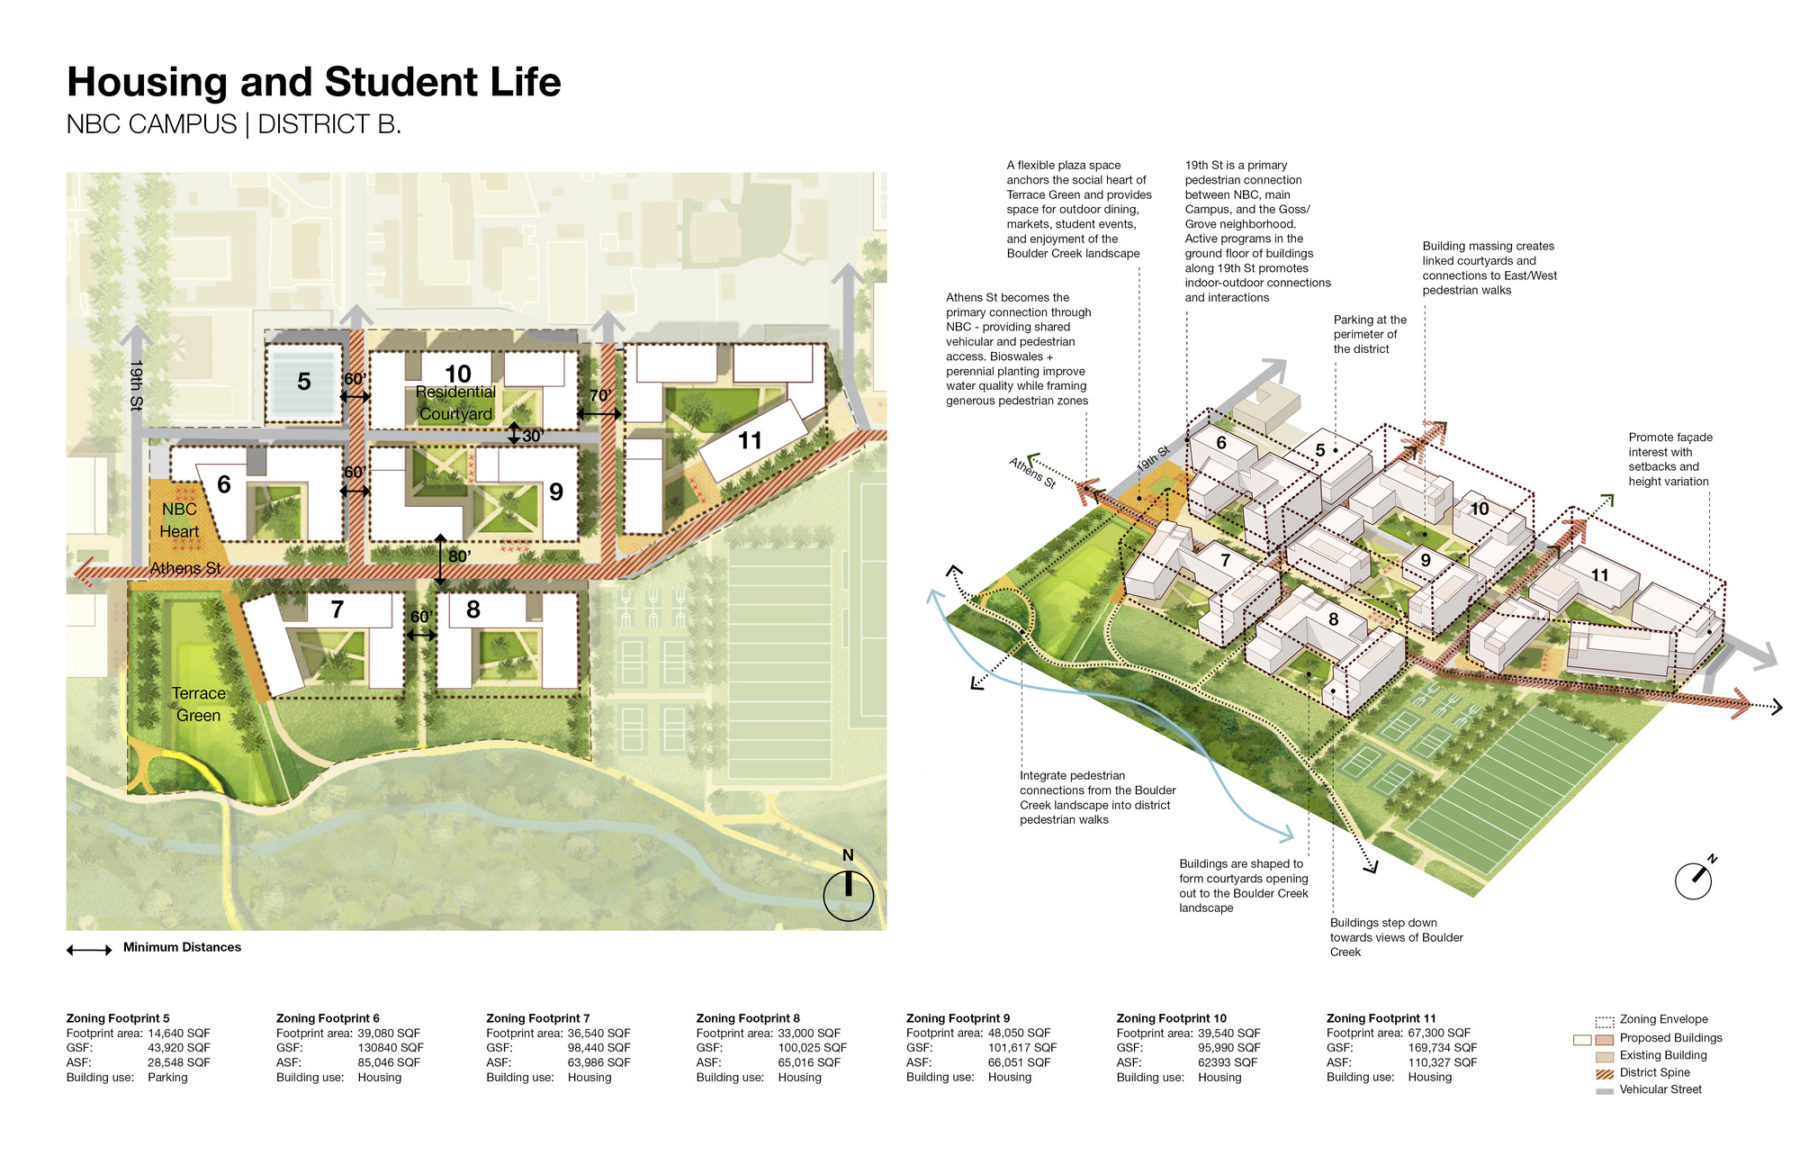 annotated plan and axon drawings with housing and student life design guidelines